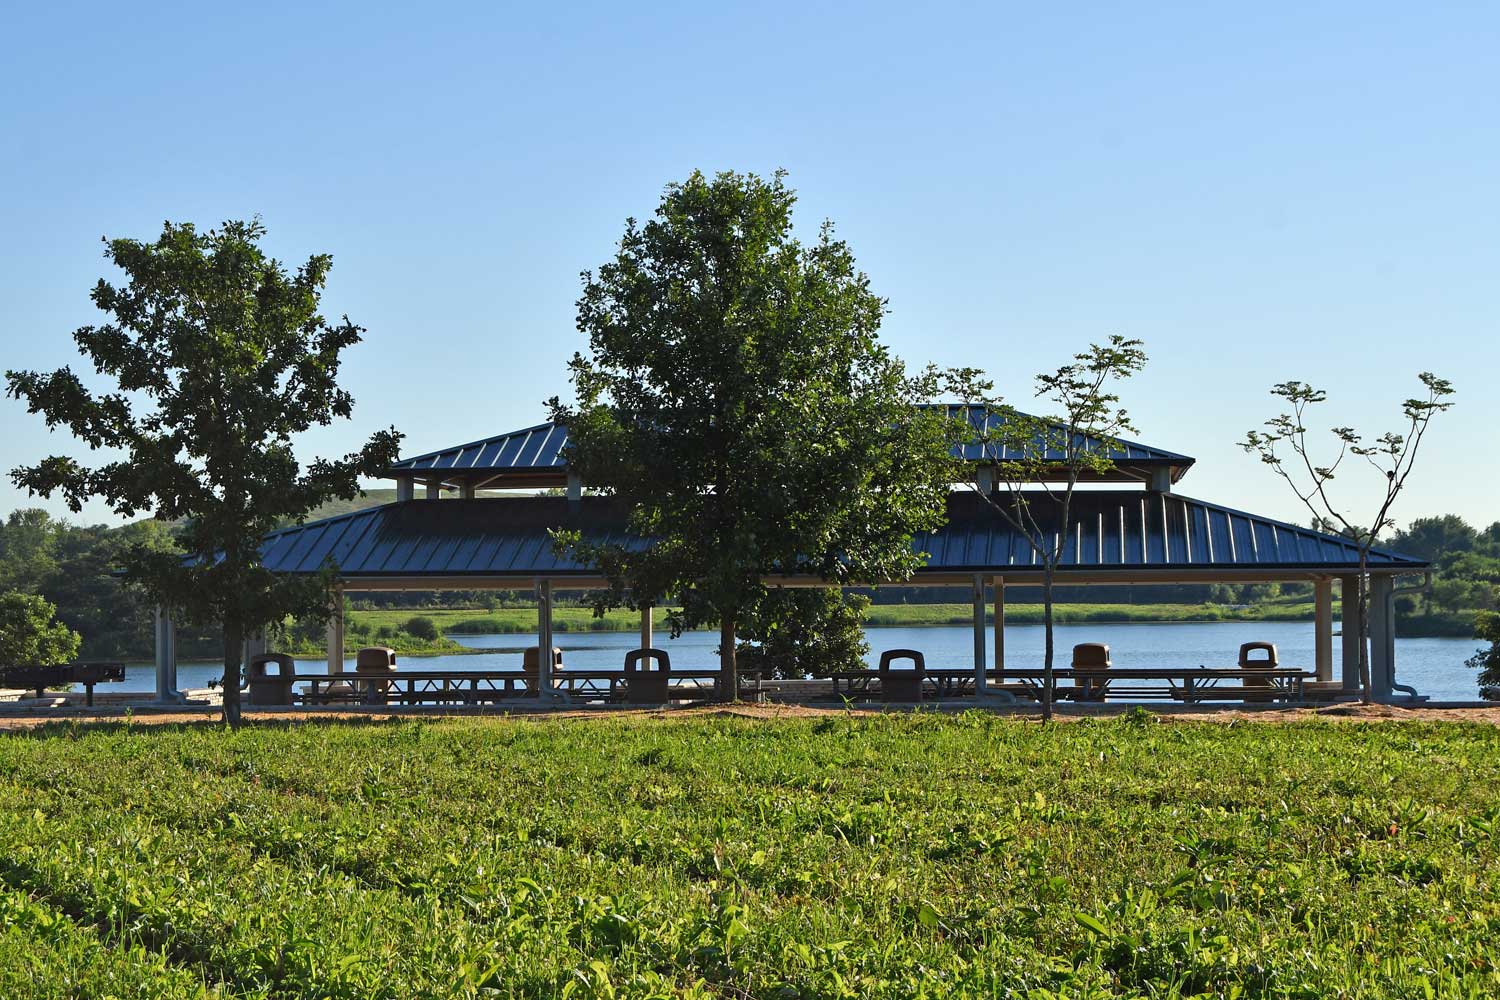 A grassy area with a large picnic shelter behind it and a lake providing a backdrop to the shelter.